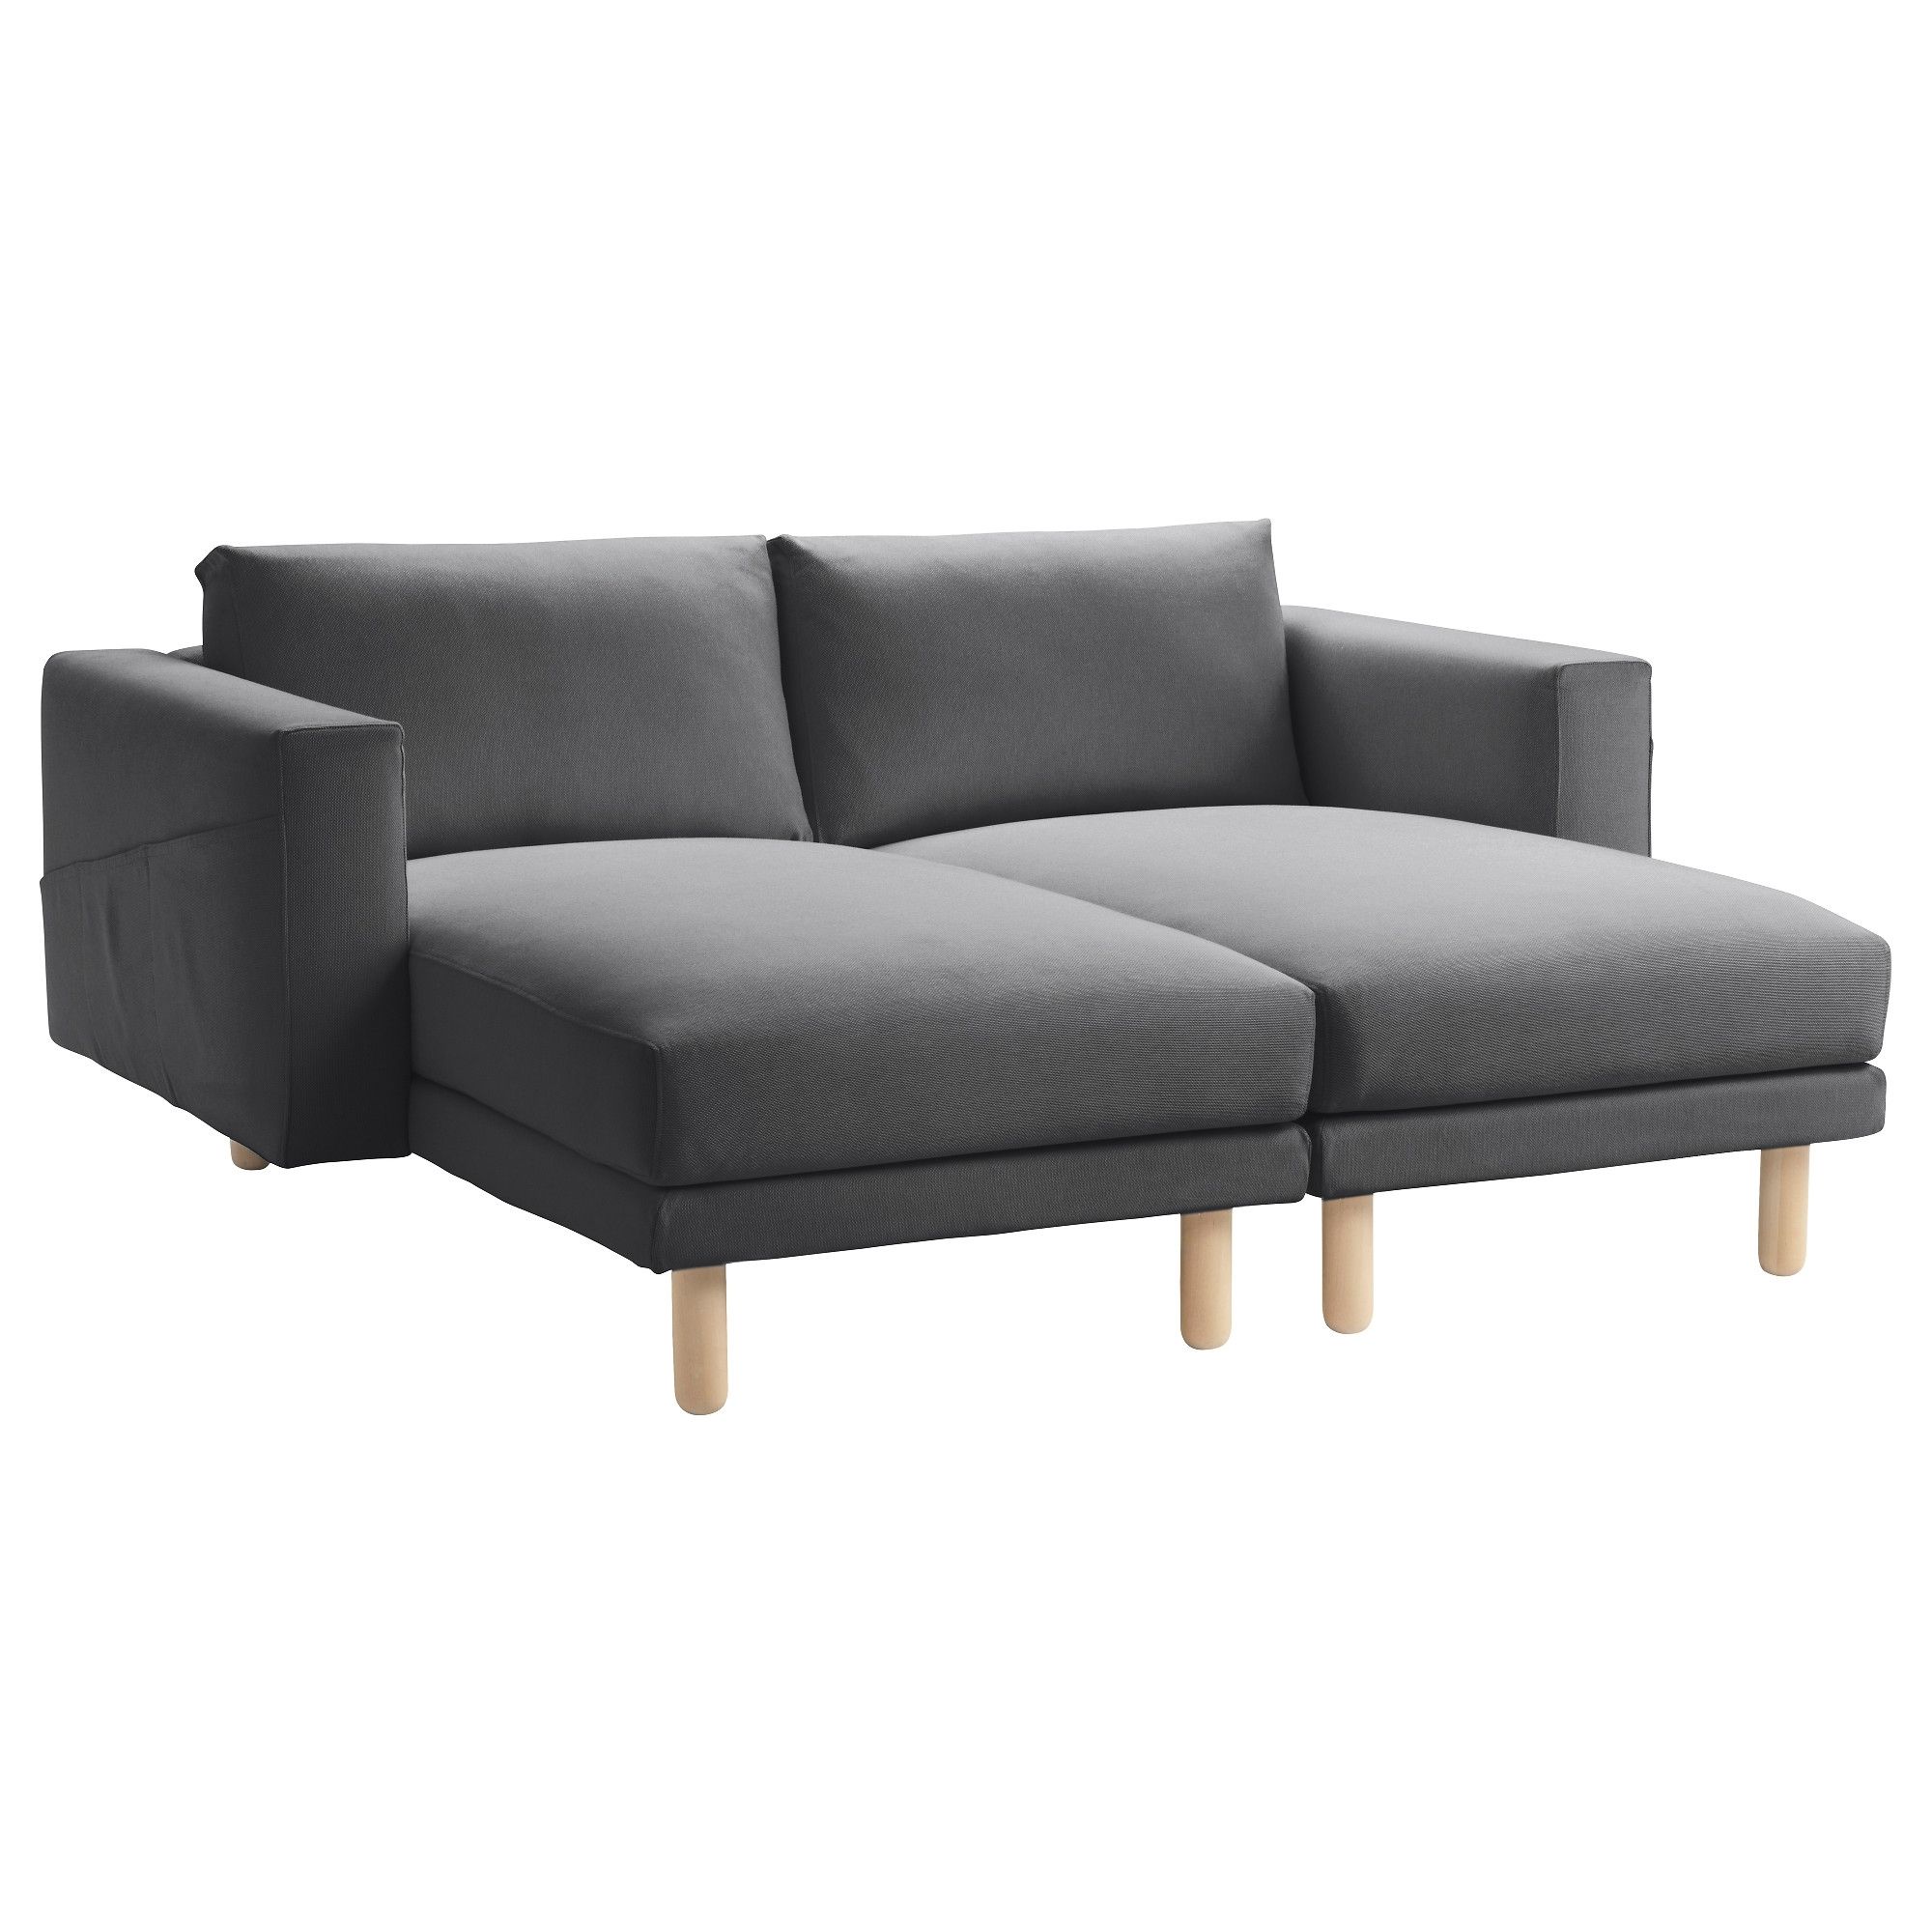 Most Current Gray Chaises For Norsborg Sectional, 2 Seat – Finnsta Dark Gray – Ikea (View 13 of 15)